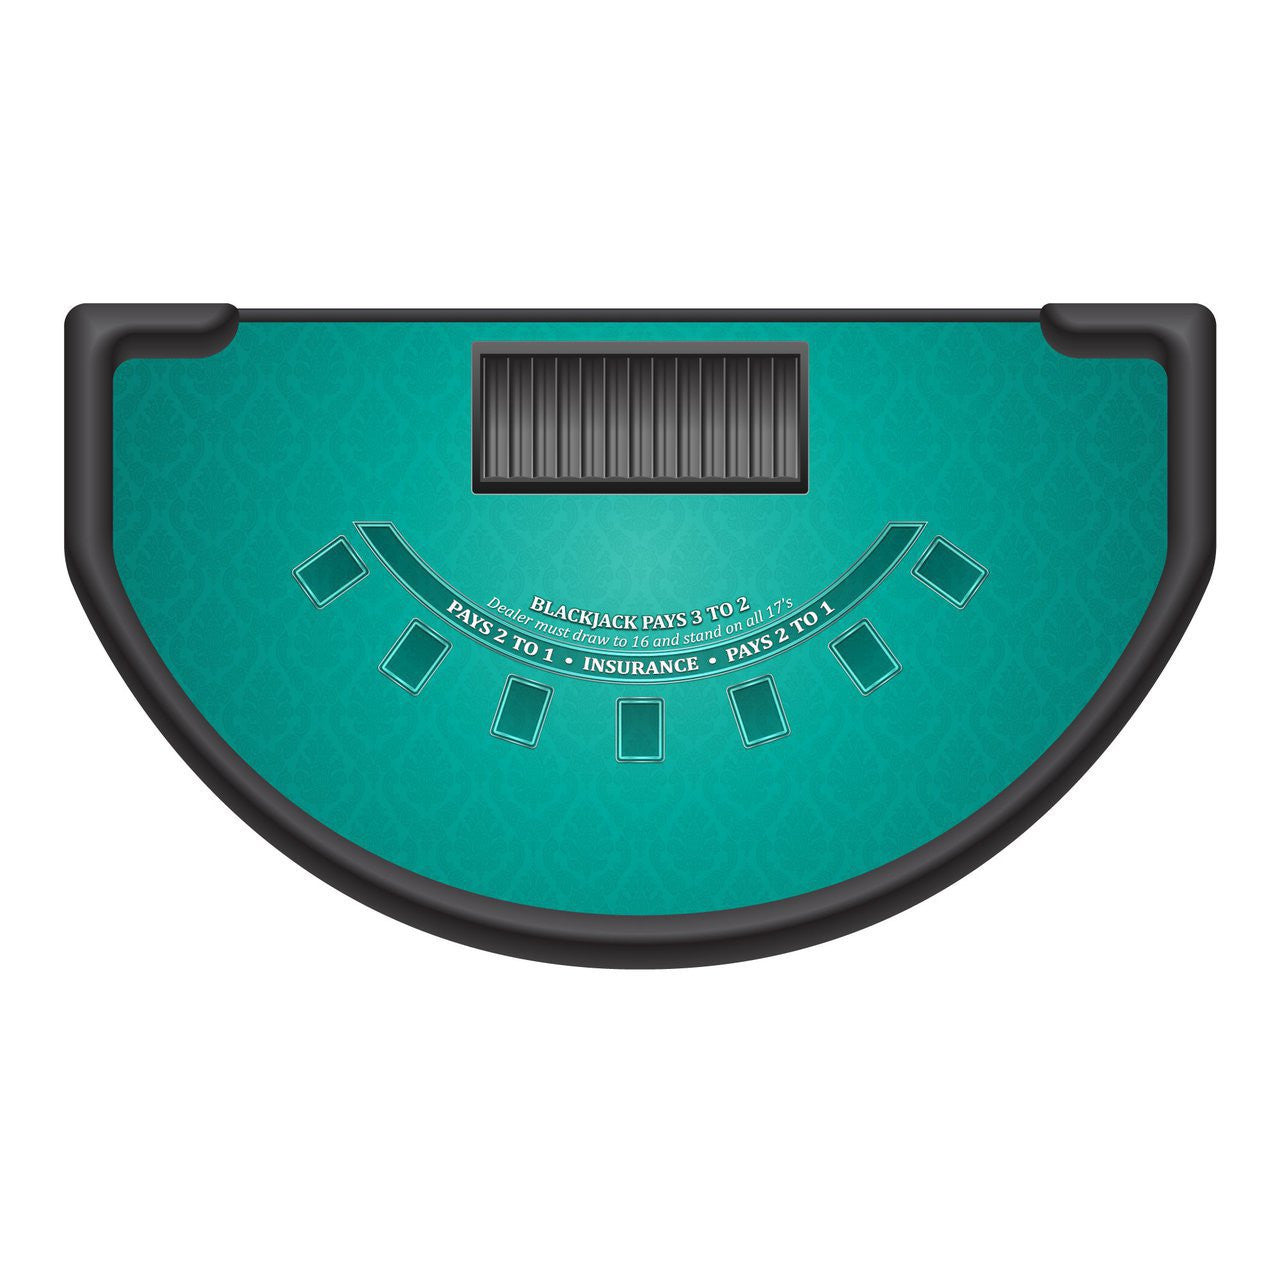 Classic Blackjack Layout - TEAL - Casino Supply